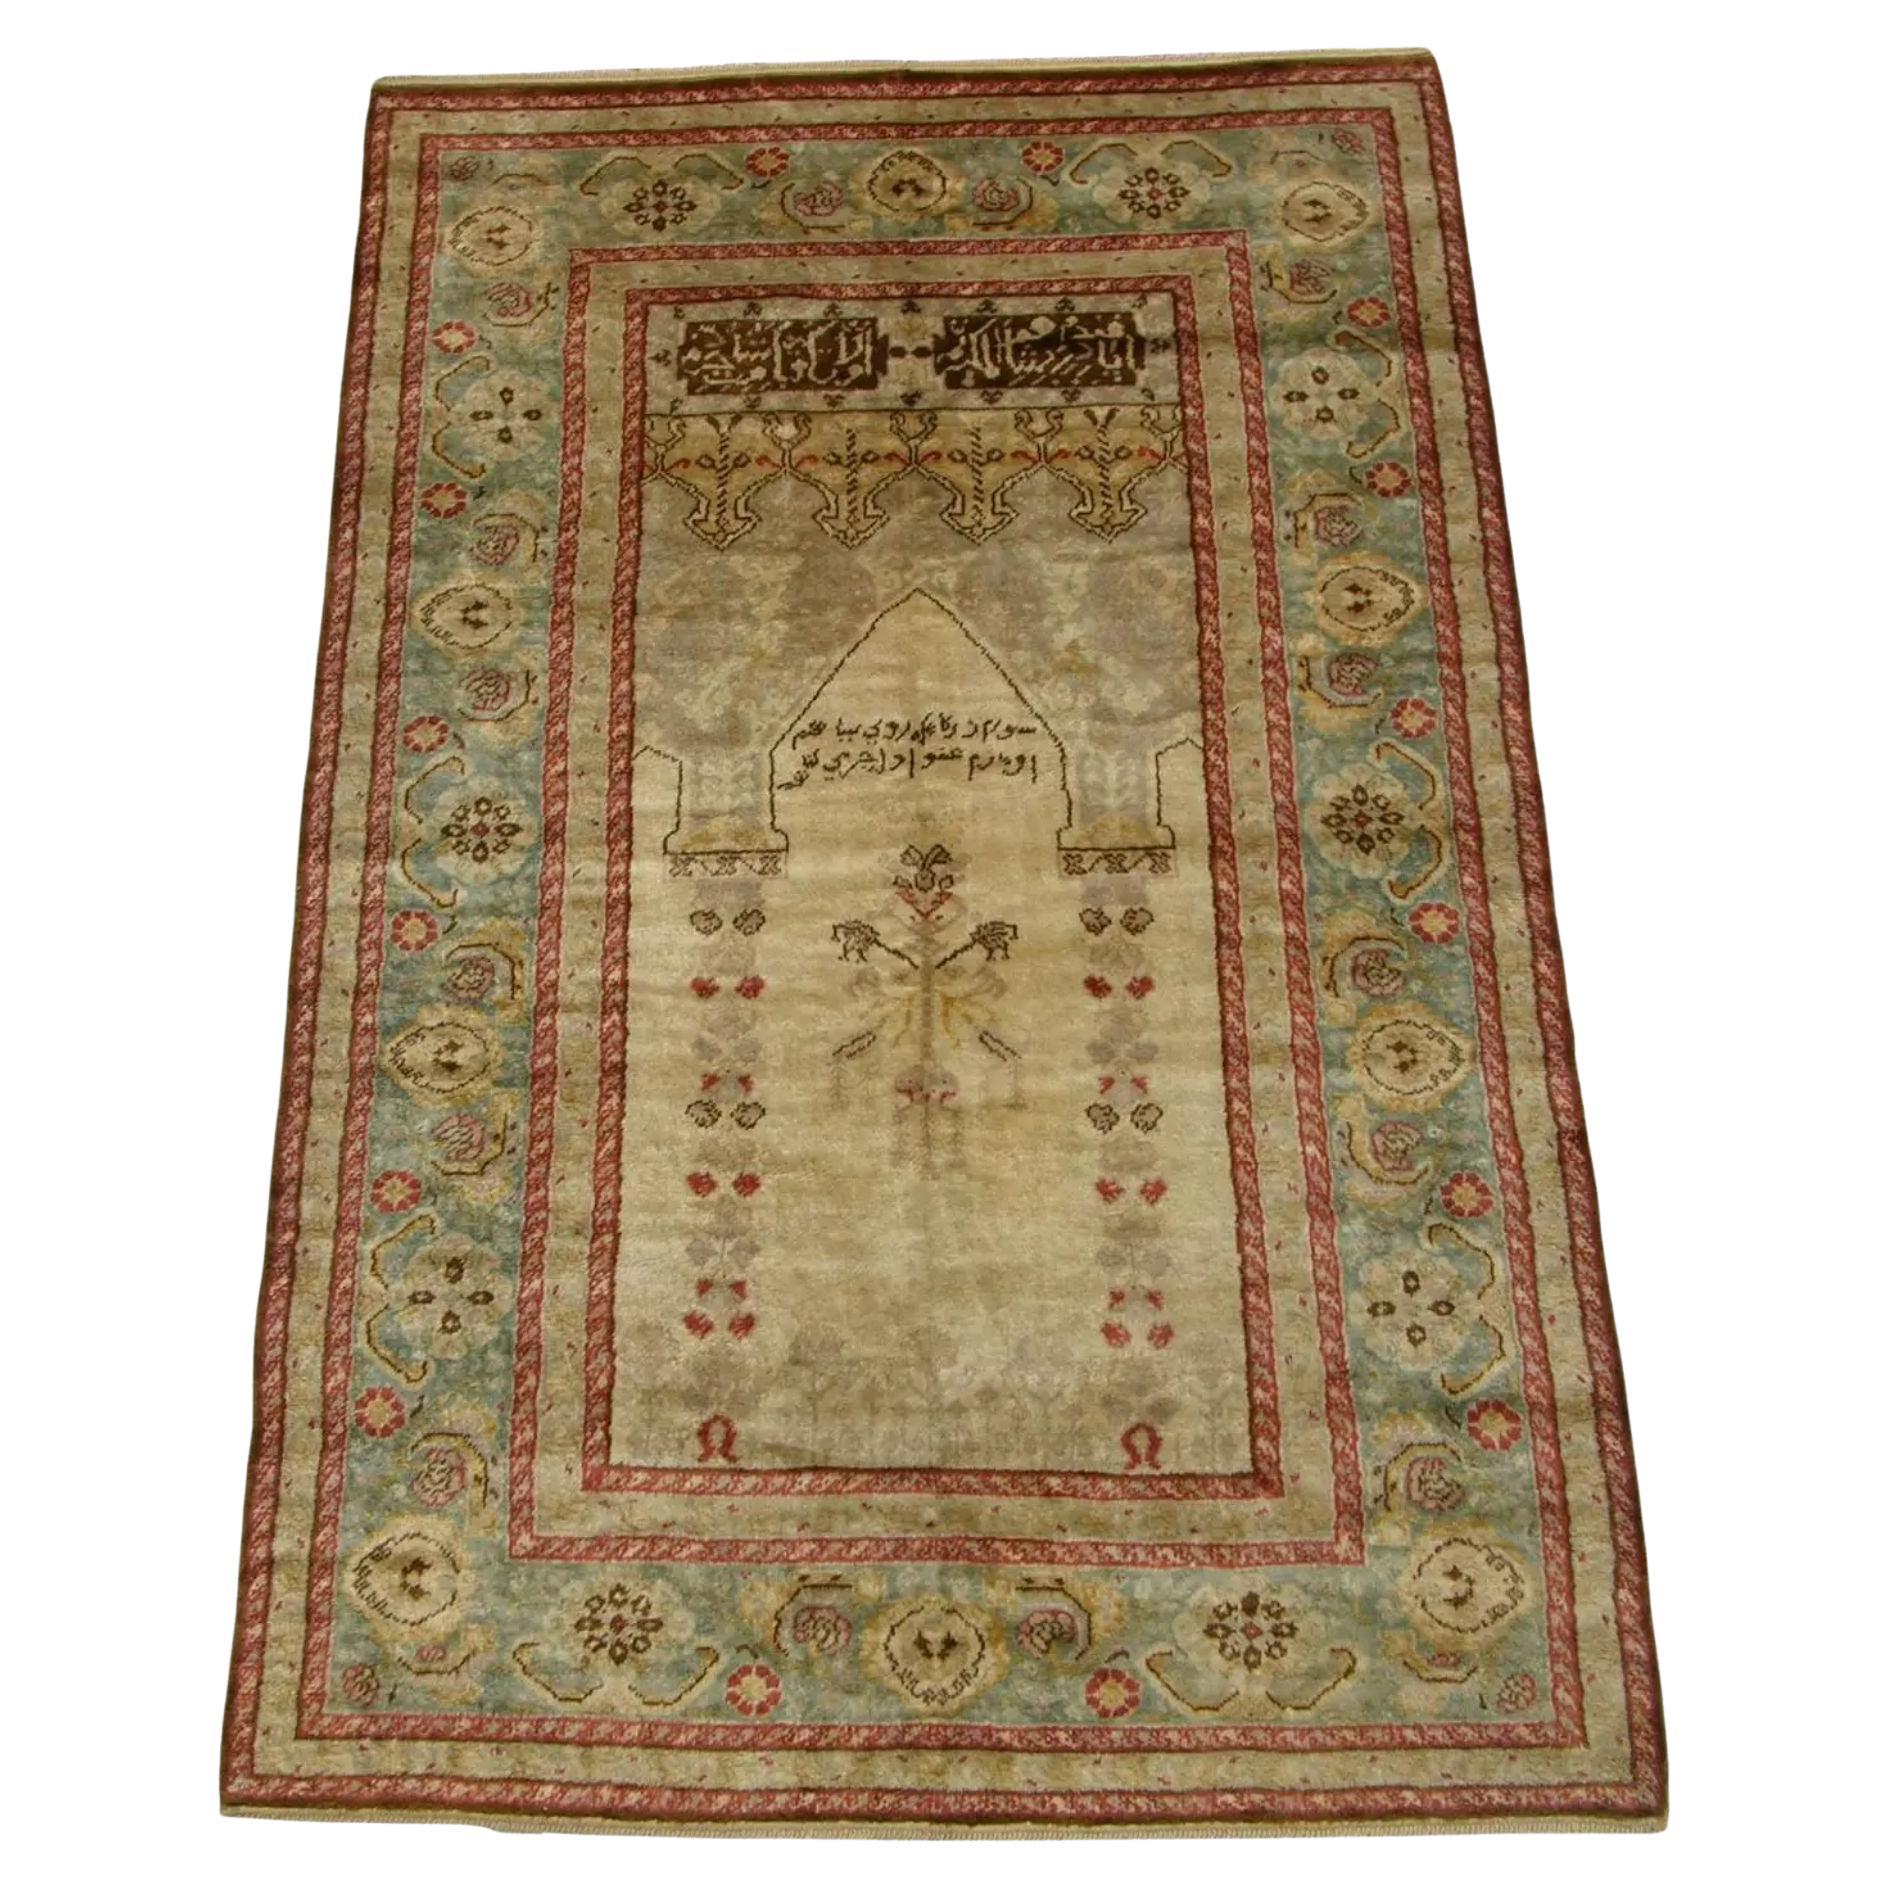 1900 Antique Woolen Turkish Rug With Signature - 5'7'' X 8'10" For Sale